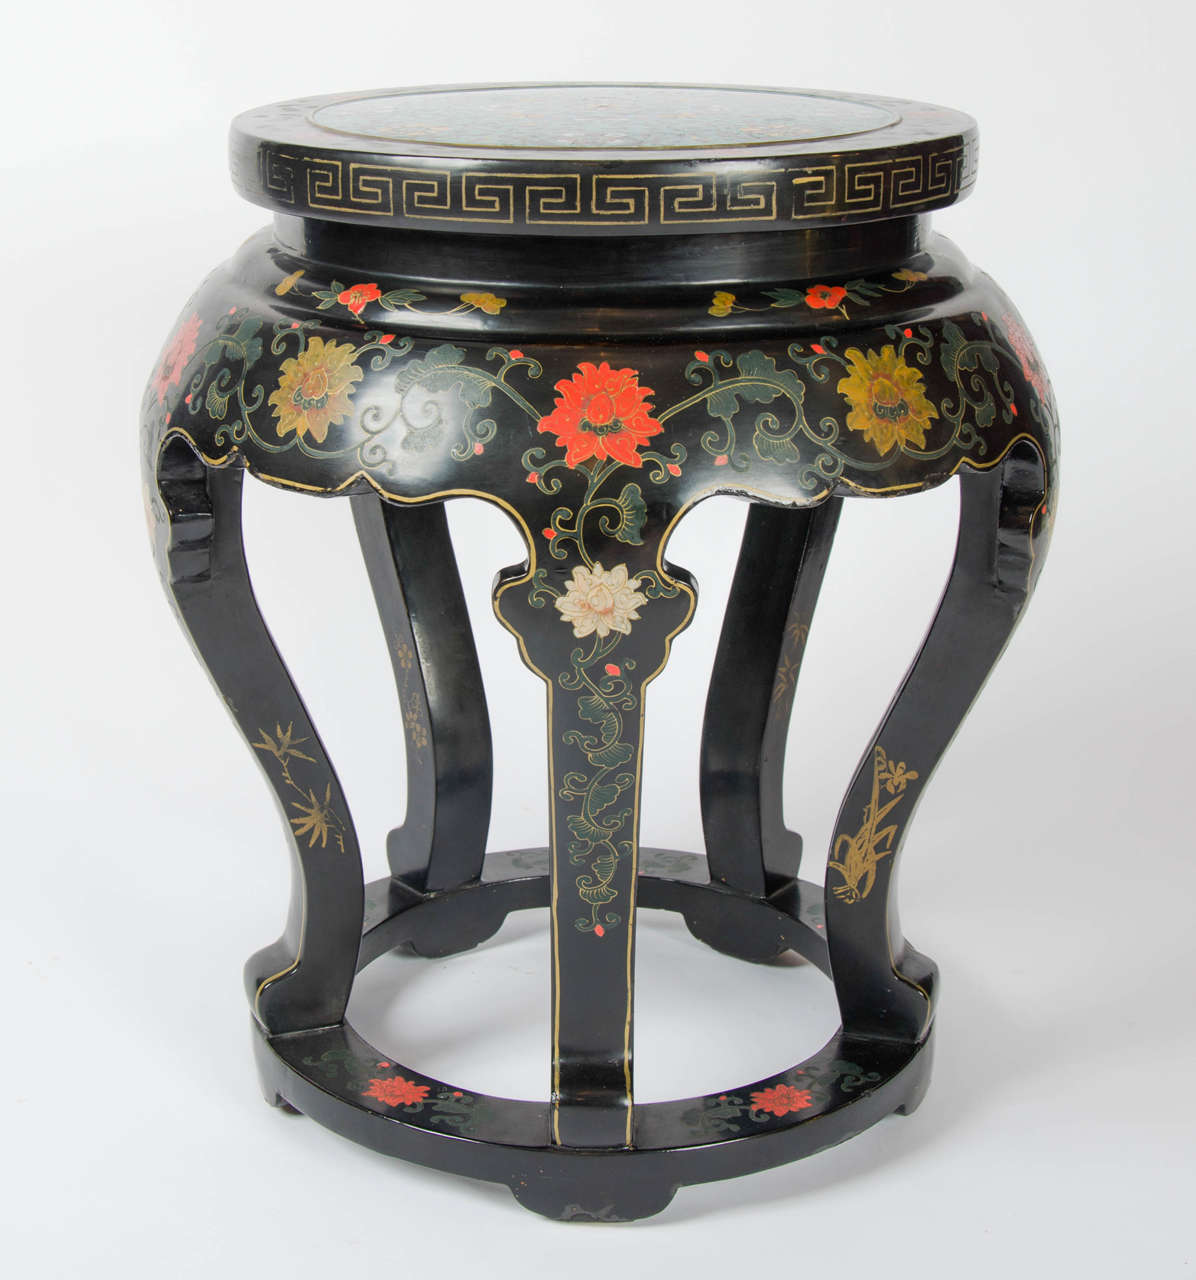 20th century Chinese Black Lacquered Side Table with Cloisonné Top (Chinesisch)